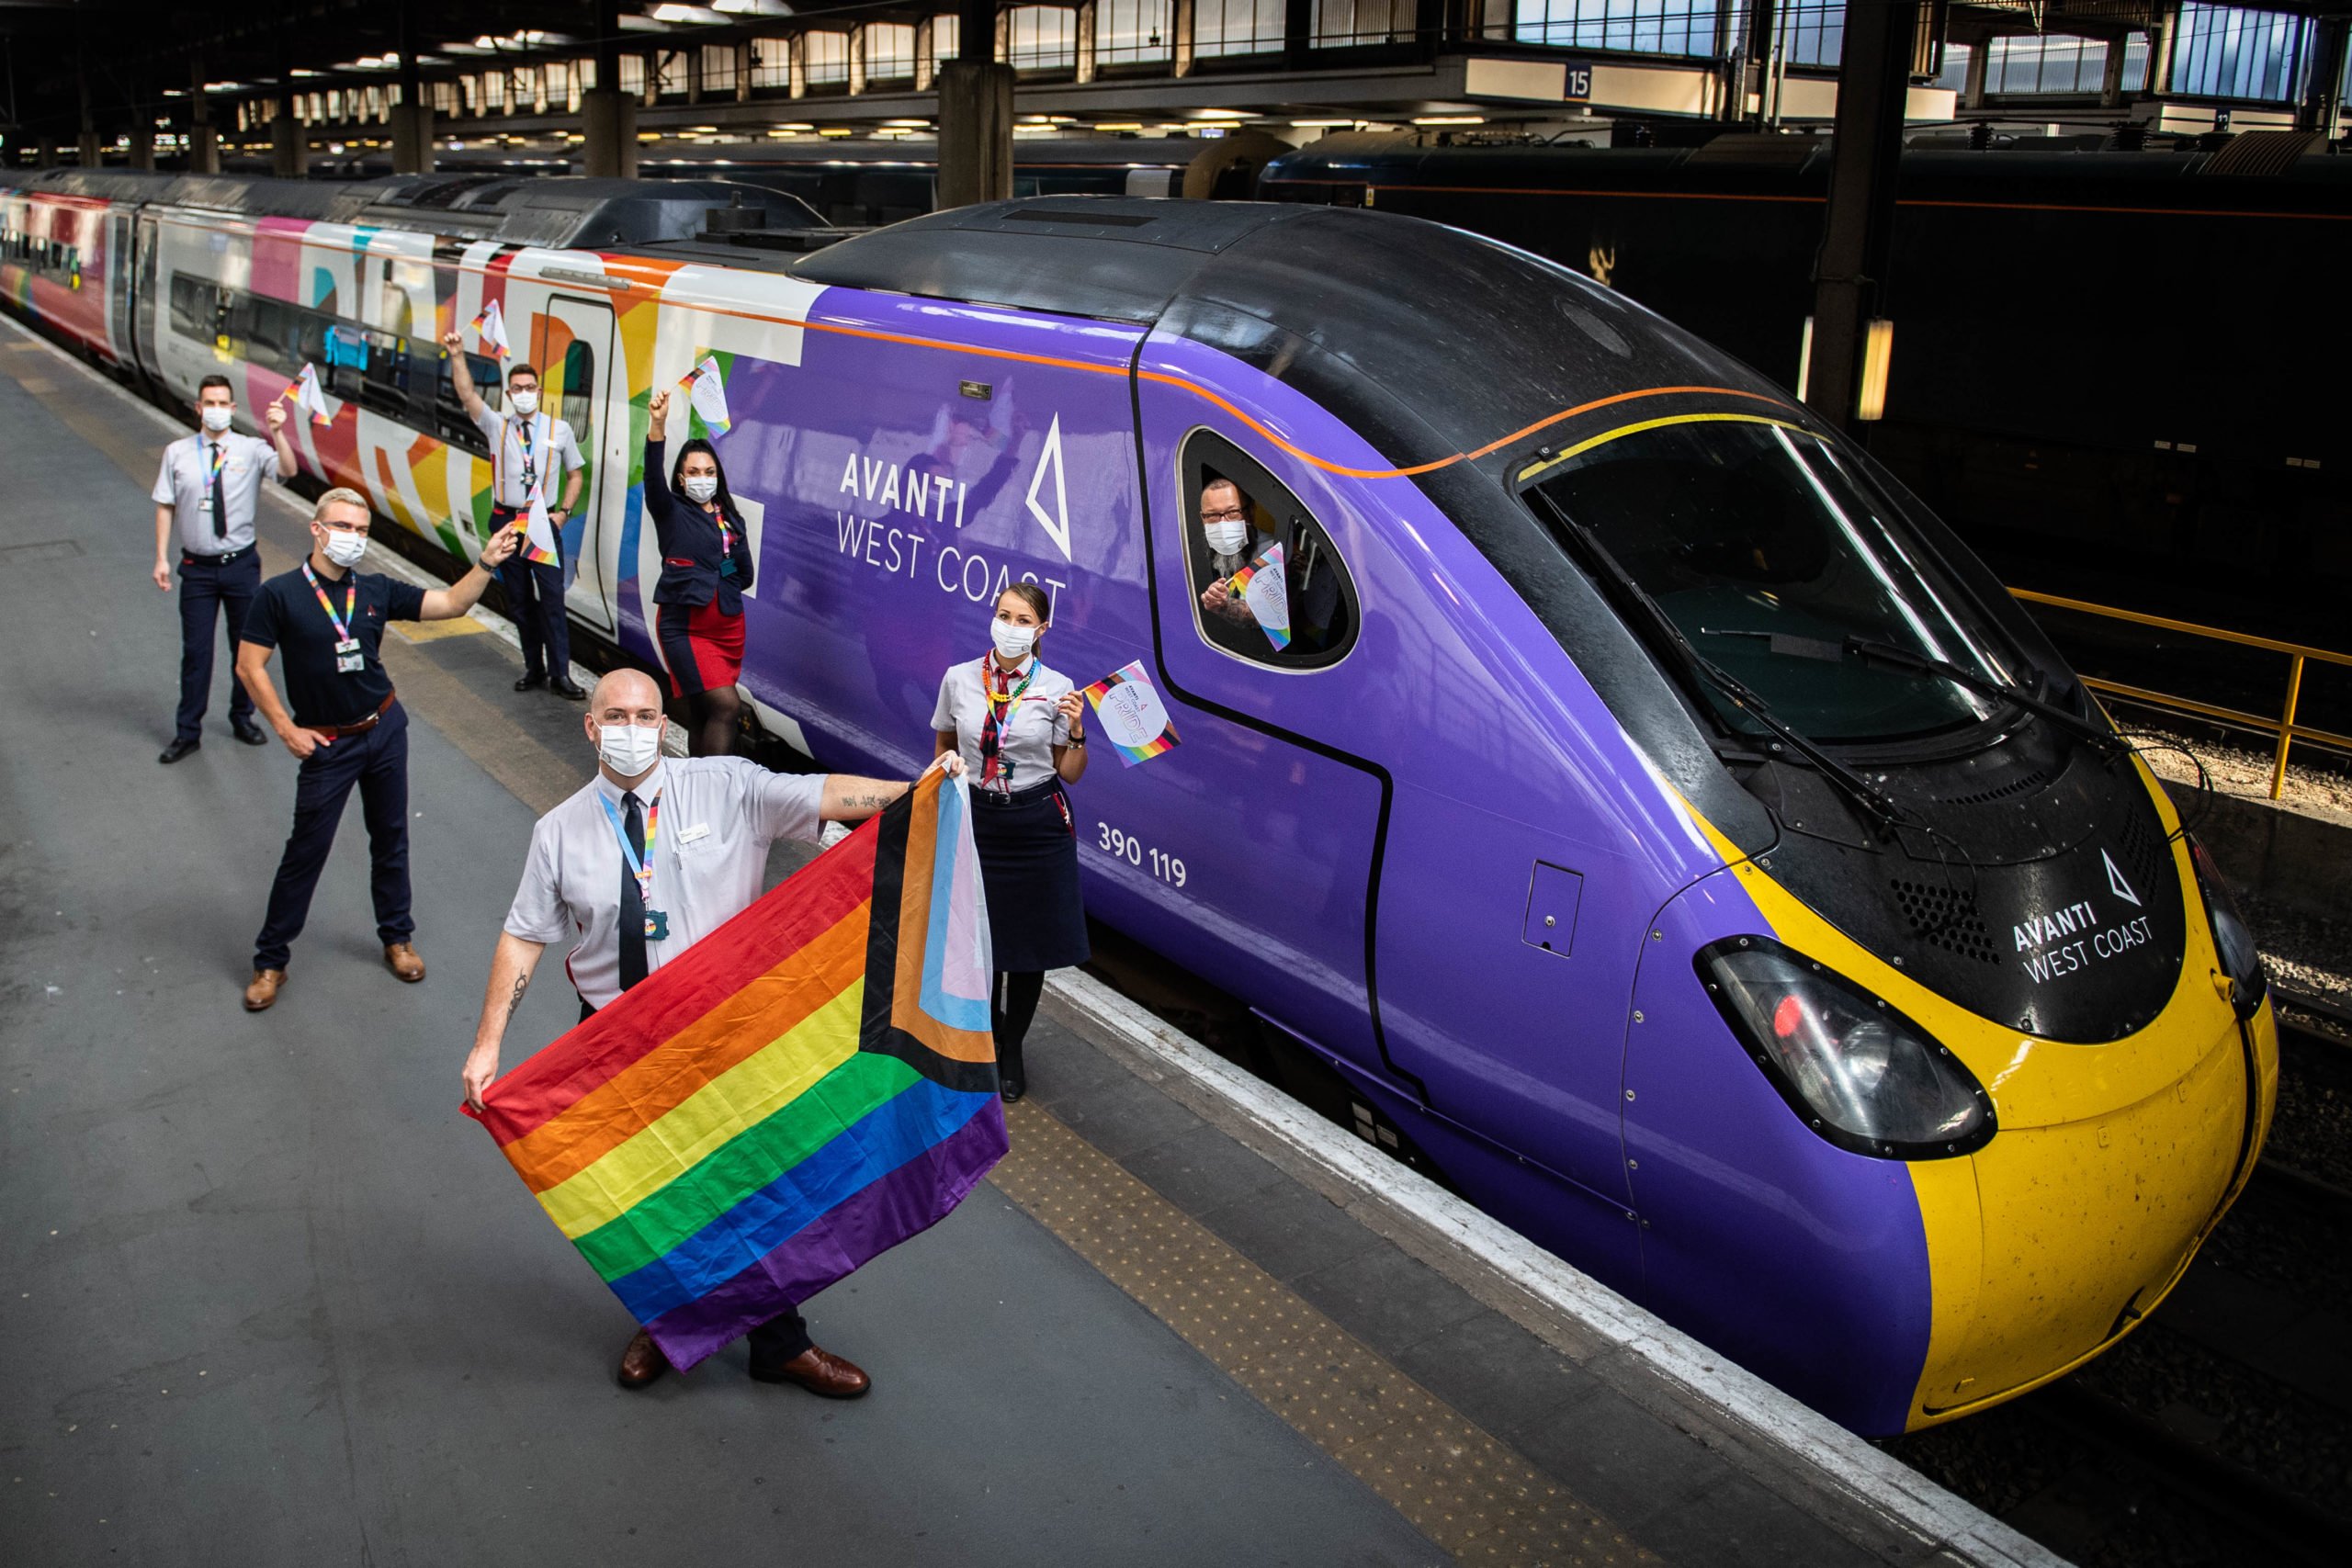 The train was waved off by Avanti West Coast staff and members of the LGBTQ+ community at Euston on Tuesday 25 August.